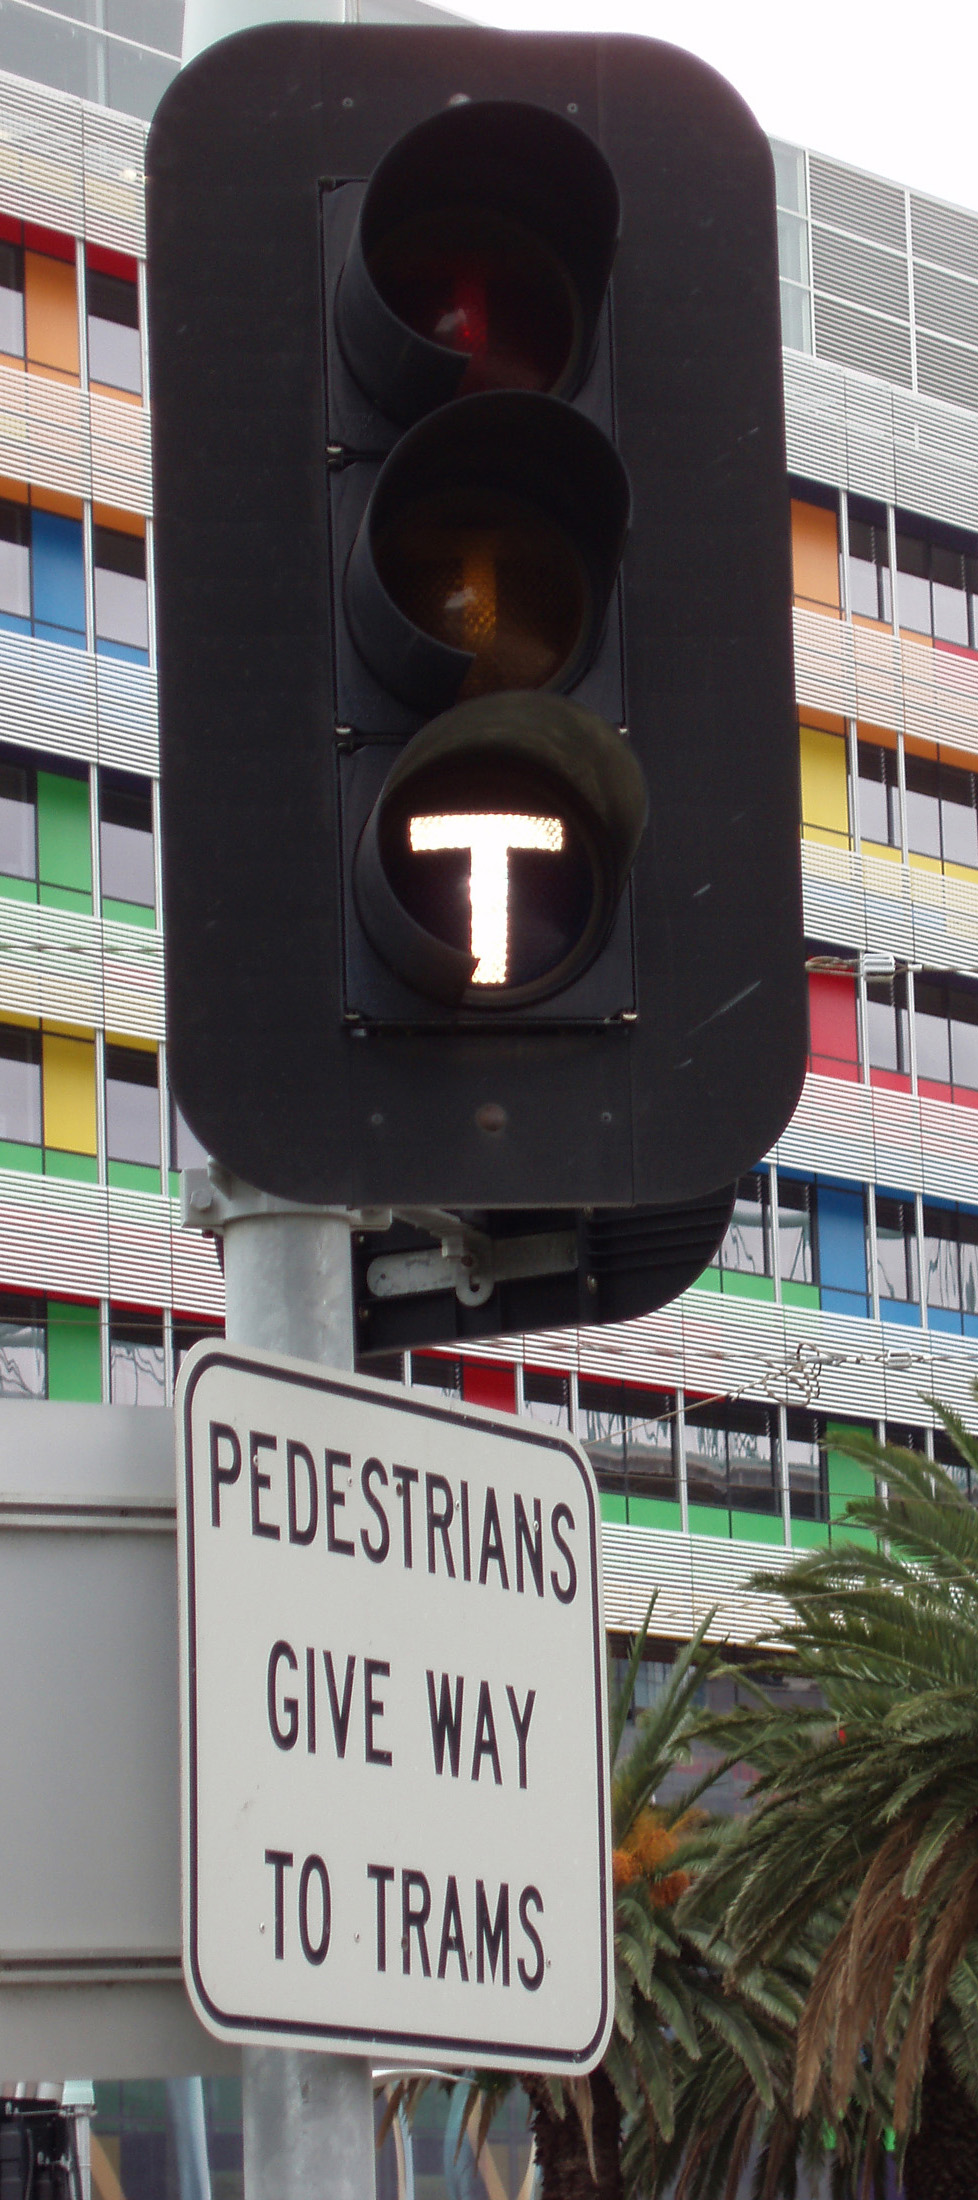 Image of a tram traffic light. Photograph courtesy of photo everywhere.co.uk.